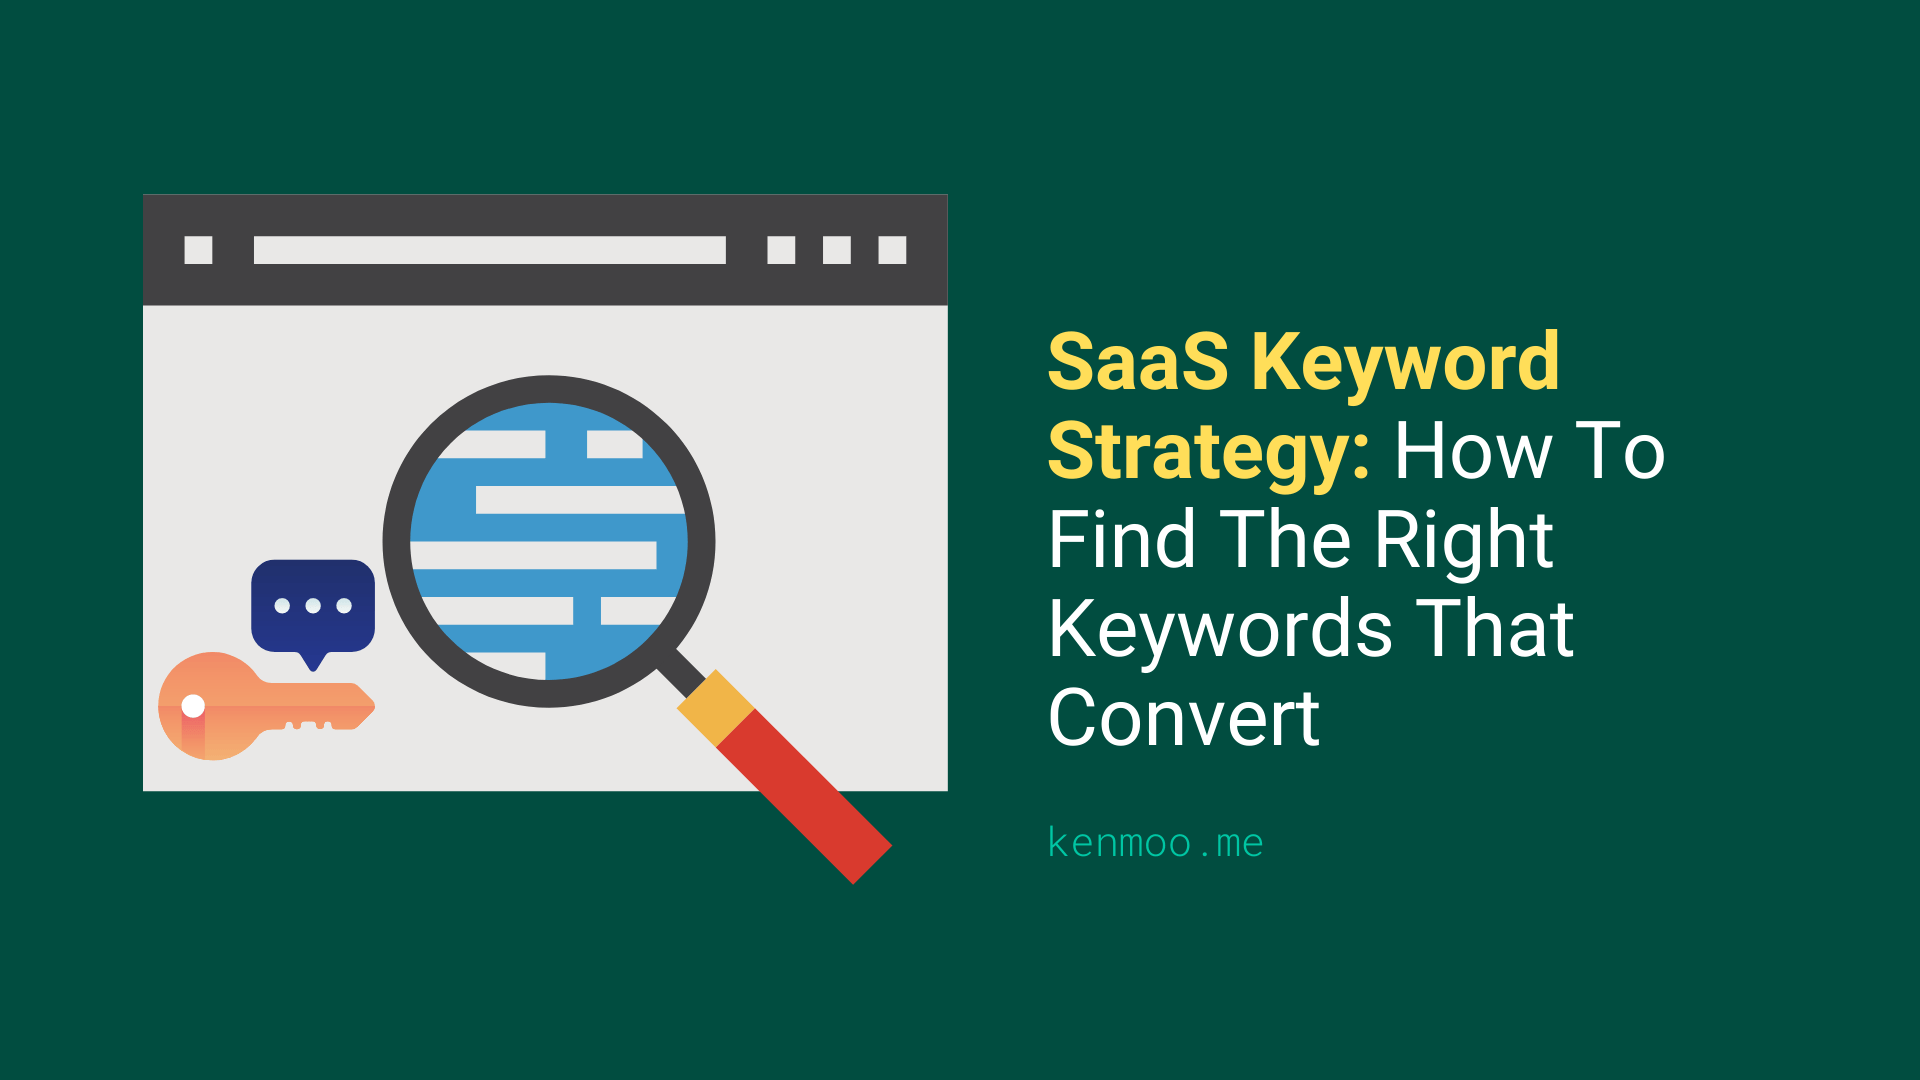 SaaS Keyword Strategy: How To Find The Right Keywords That Convert